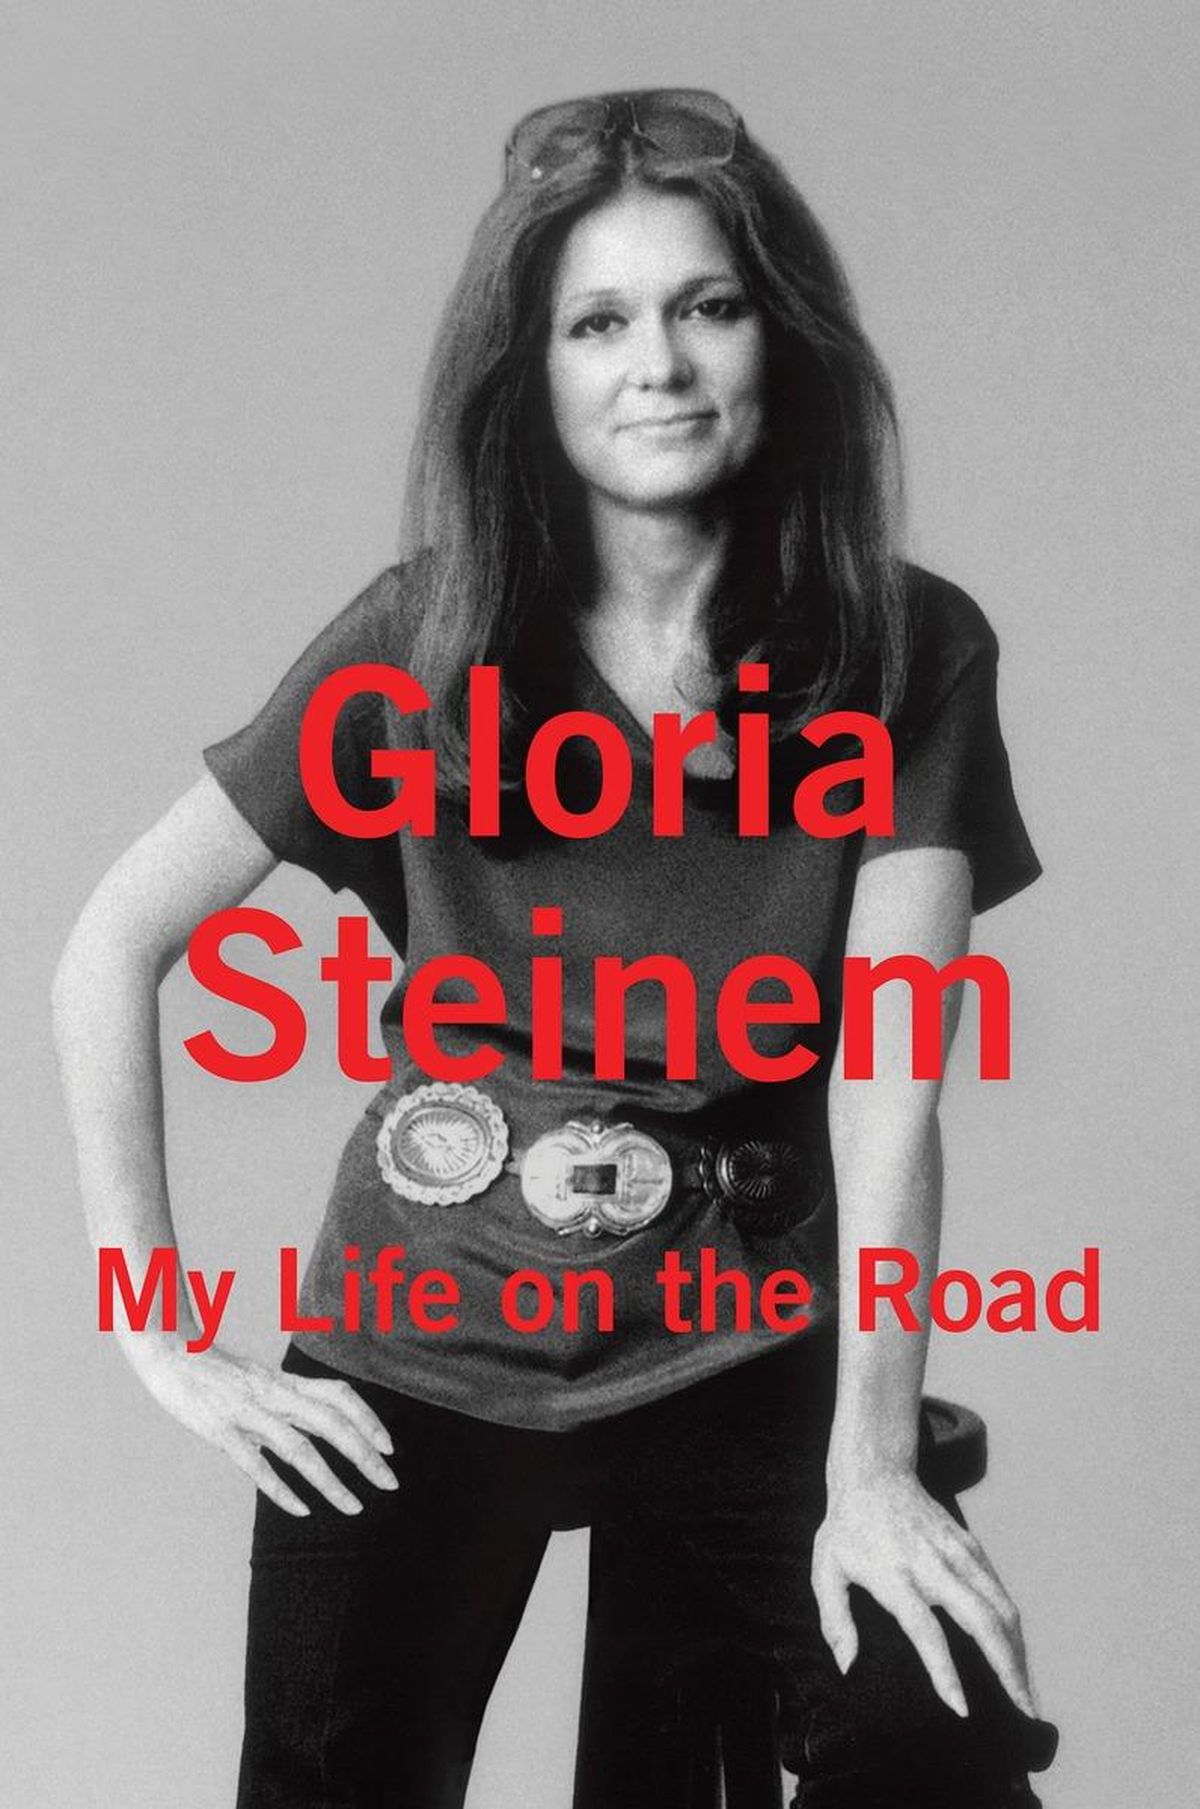 This book cover image released by Random House shows “My Life On the Road,” by Gloria Steinem. (<!-- No photographer provided --> / Associated Press)